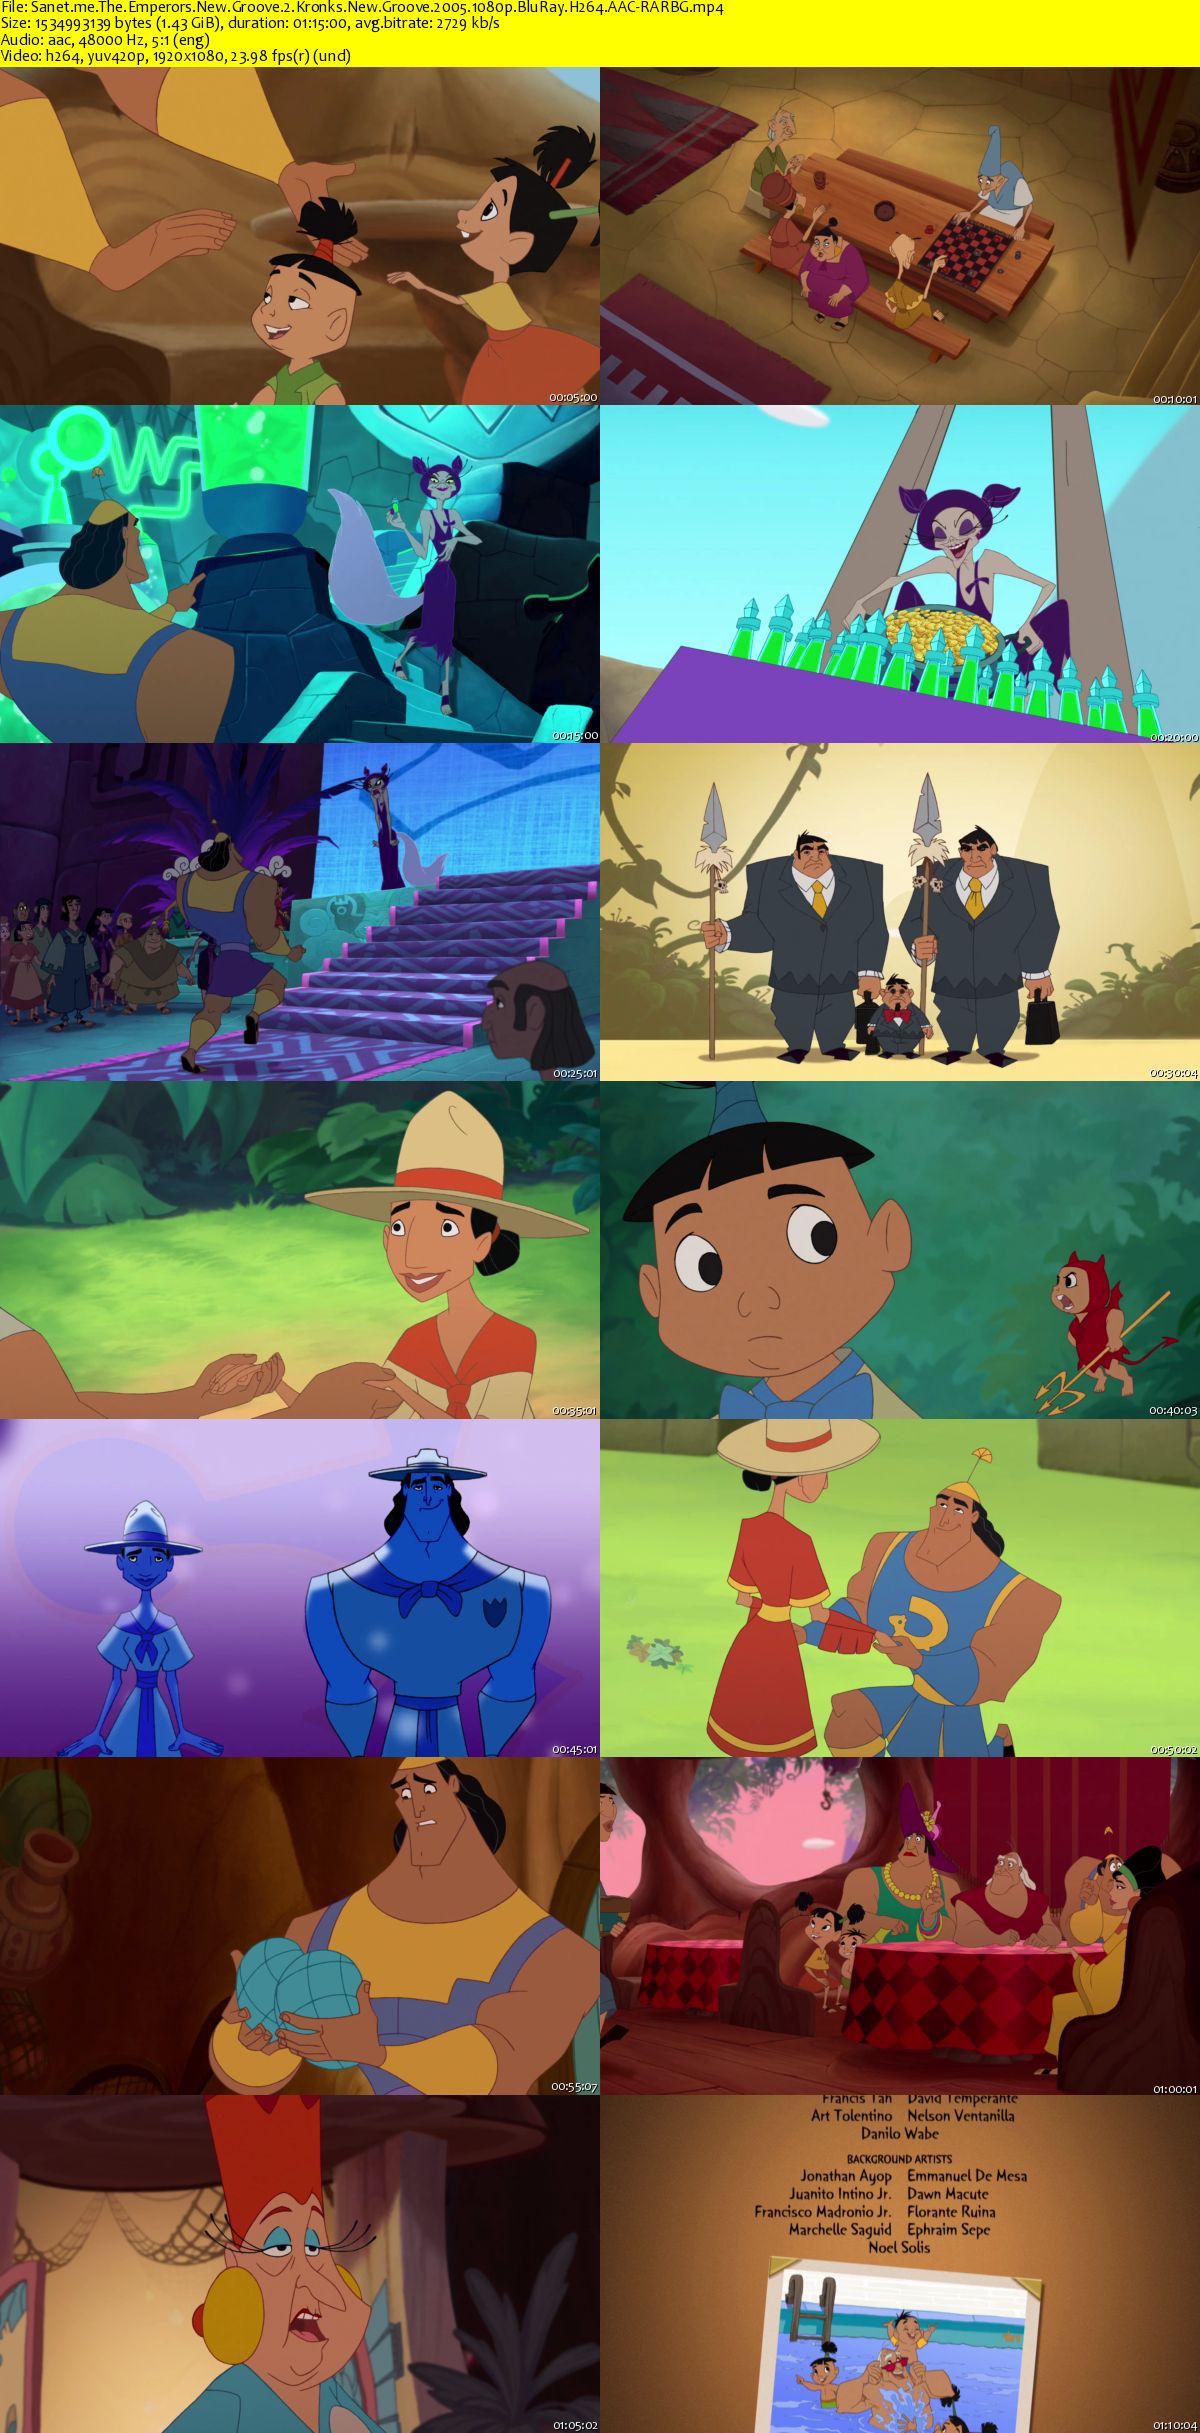 The emperor new groove. The Emperor's New Groove 2: Kronk's New Groove. Kronk's New Groove. The Emperor's New Groove Kronk. Куско изма Кронк.